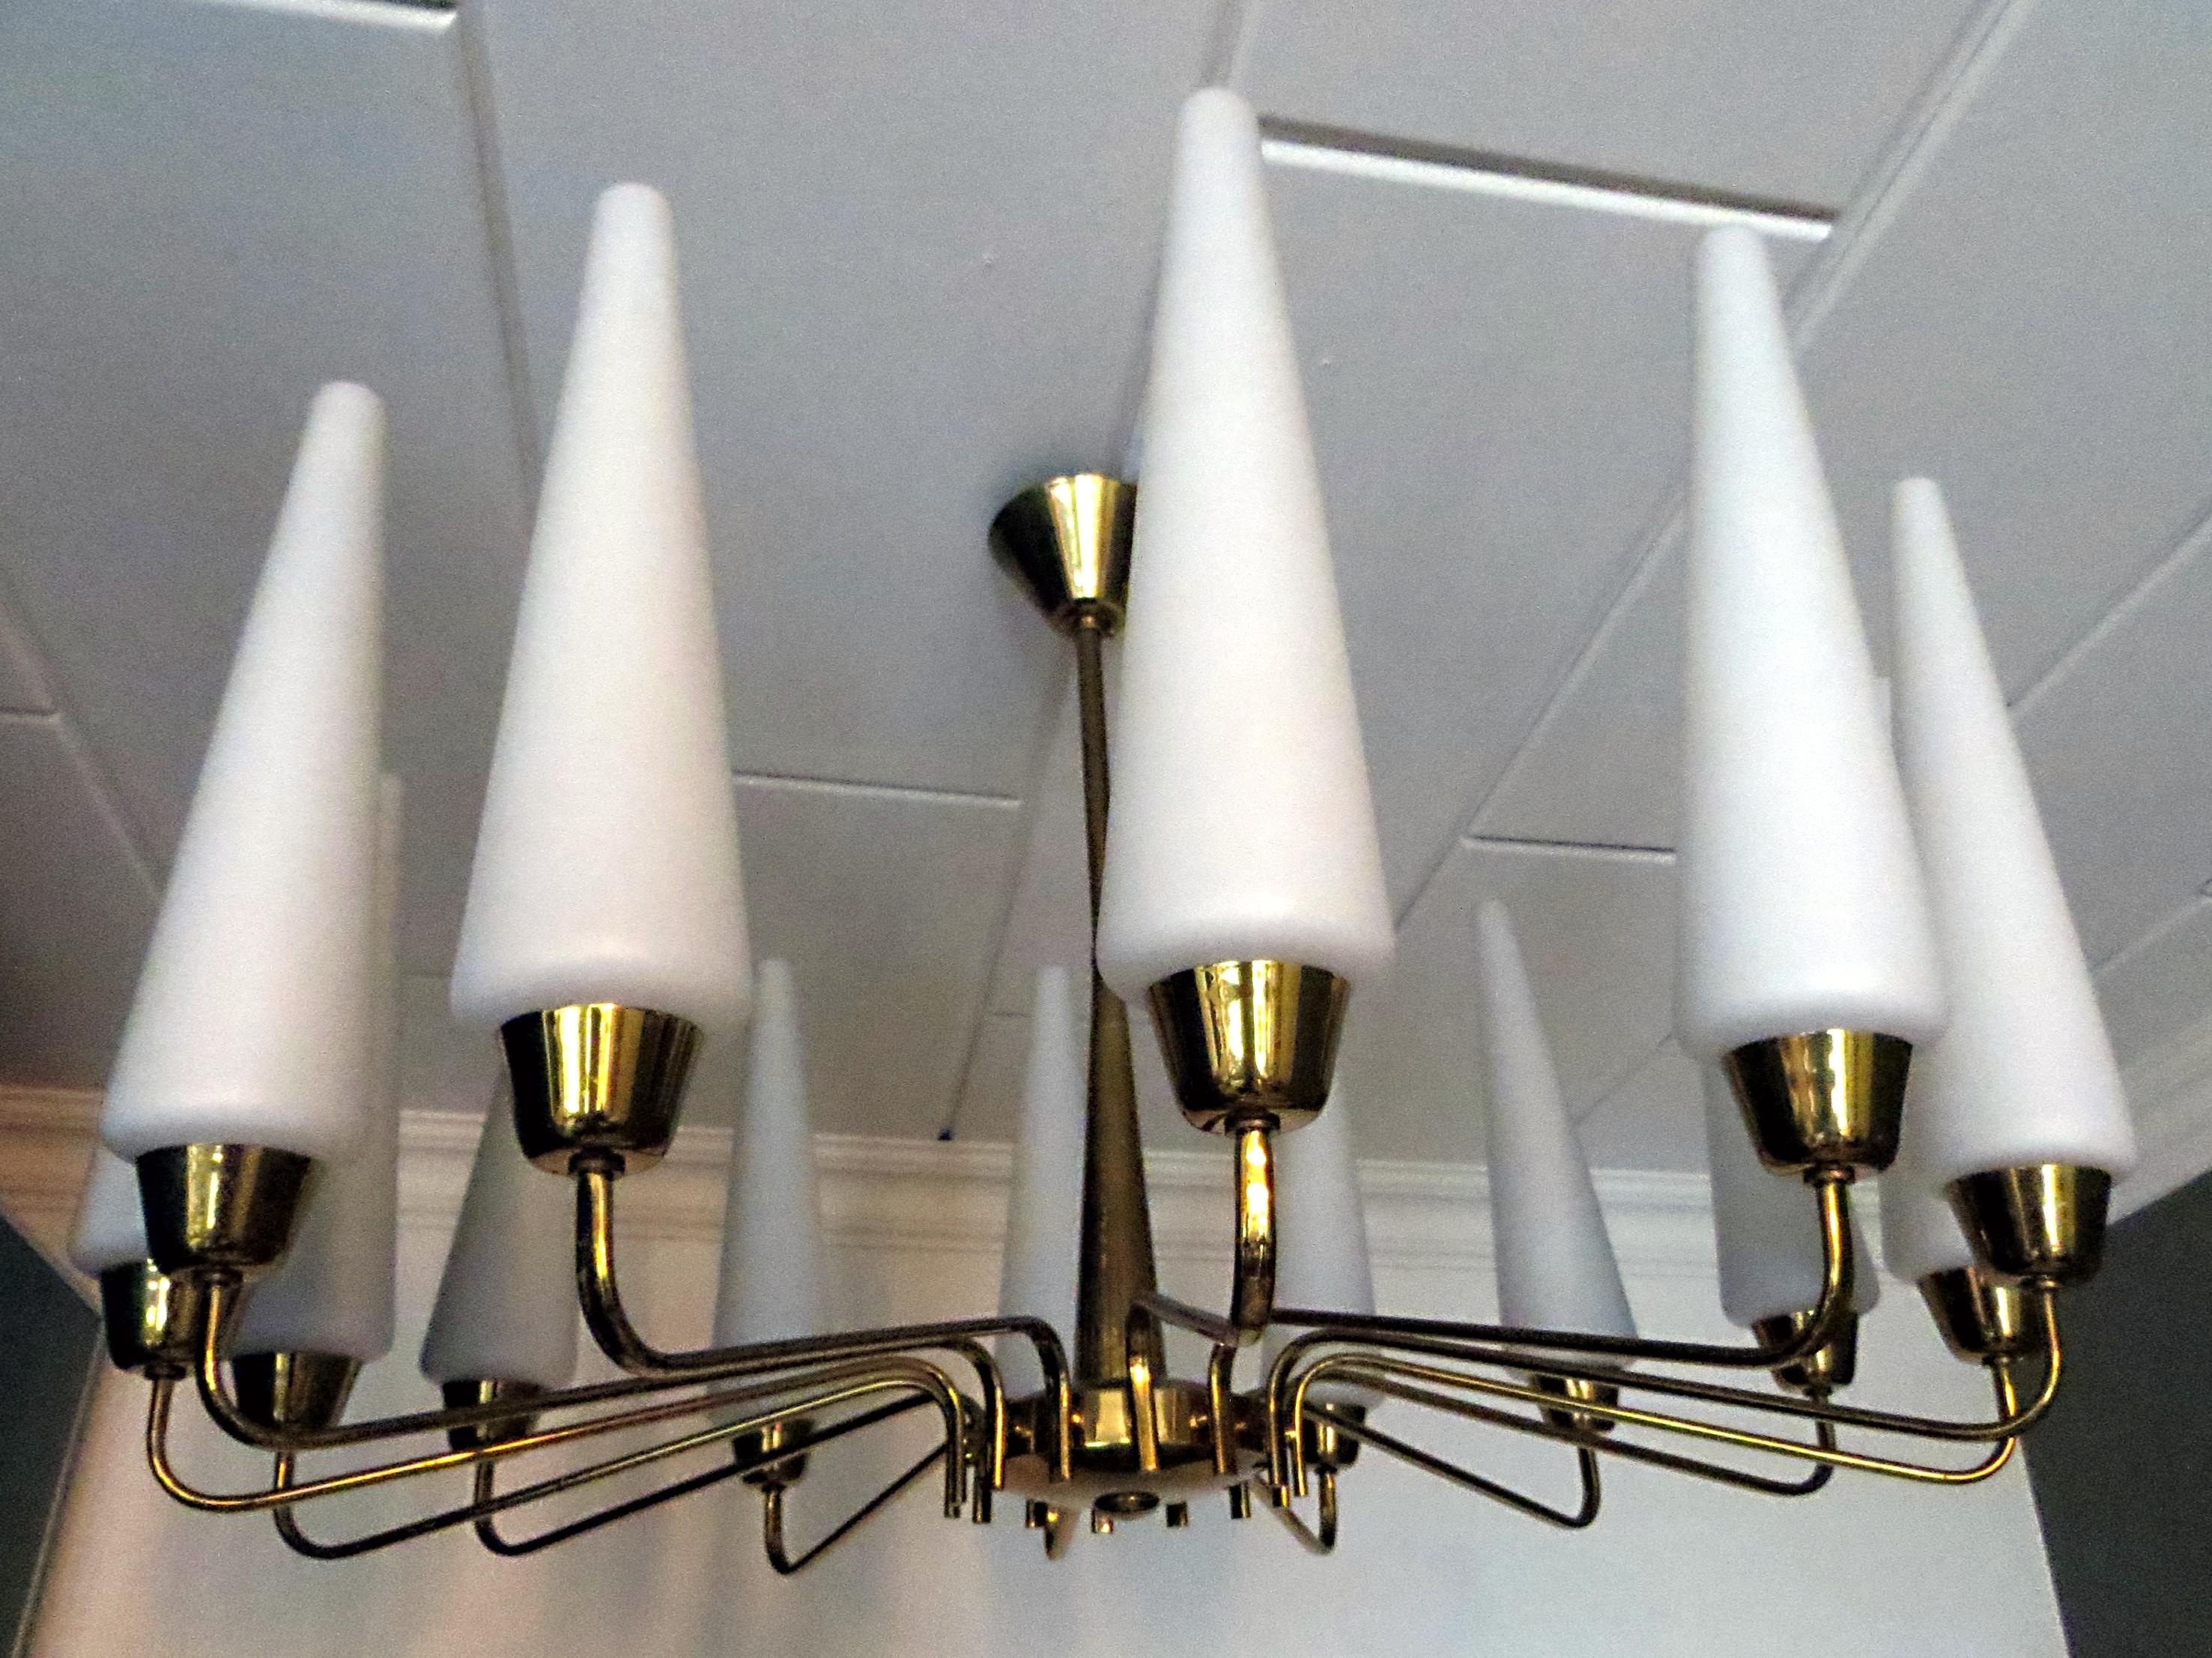 X-Large French Mid-Century Sunburst Chandelier with 14 White Satin Glasses 1950s For Sale 1